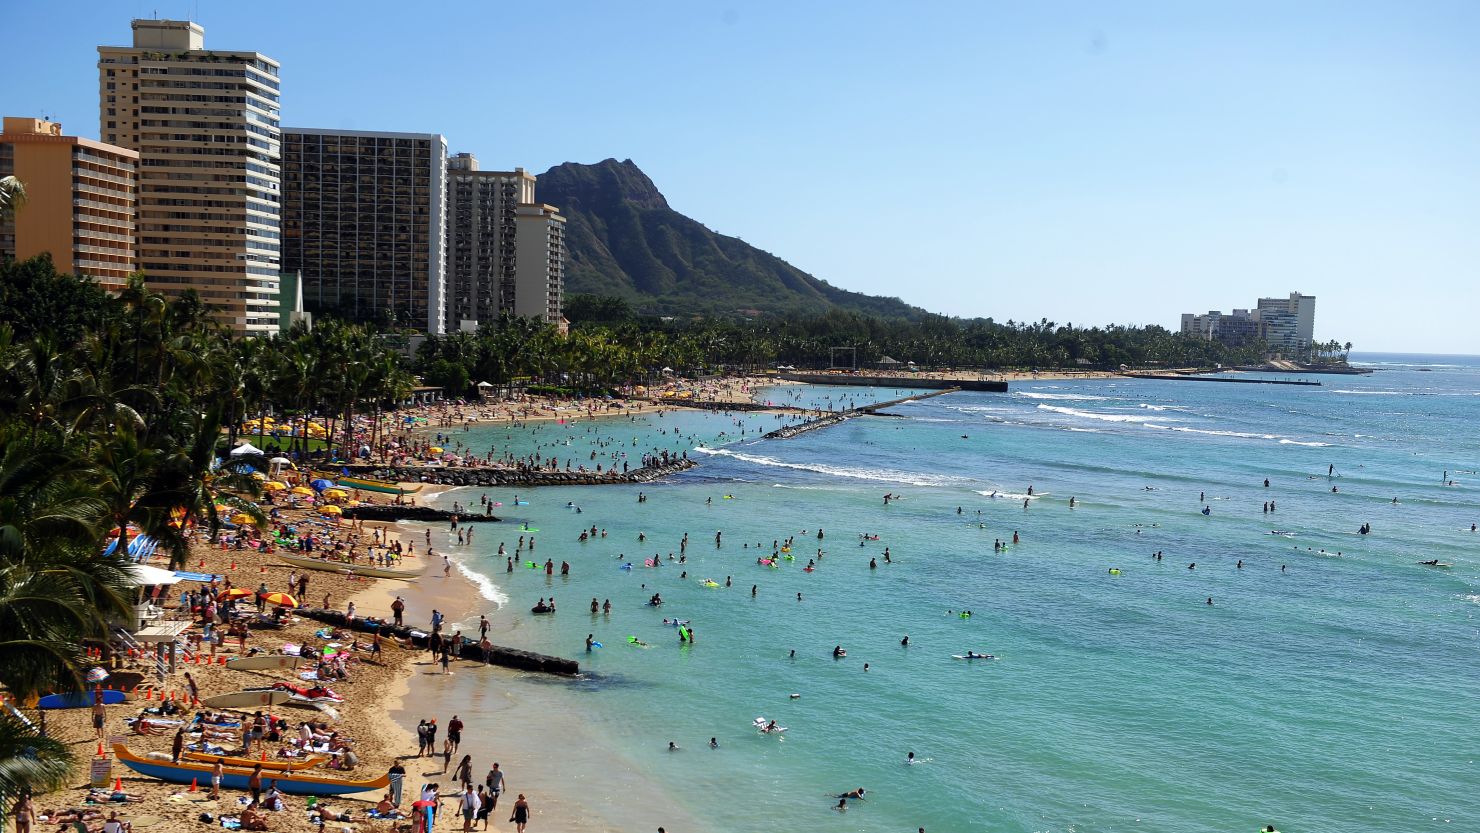 People often flock to visit friends who live in tourist hot spots such as Honolulu.